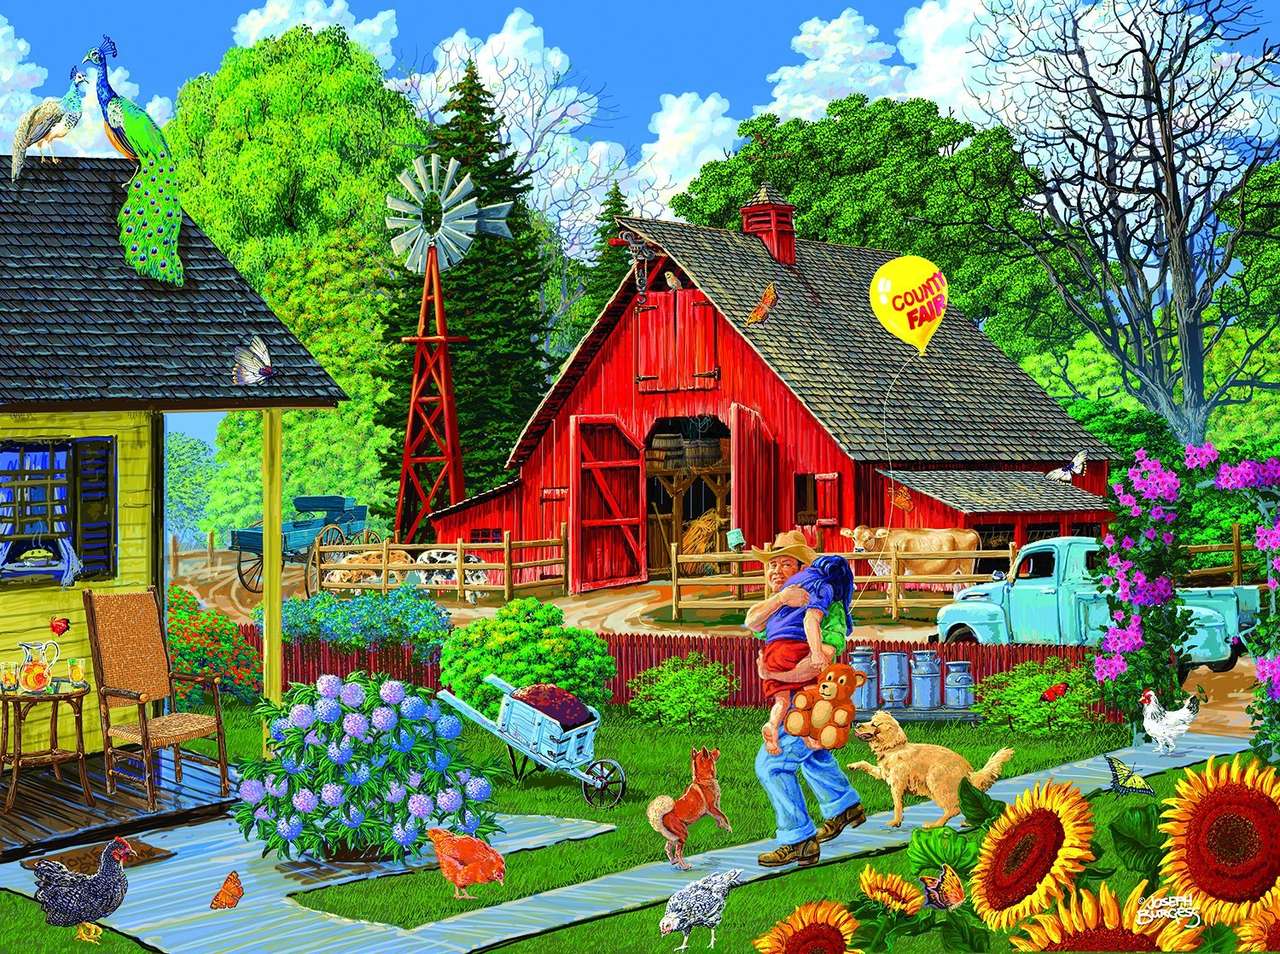 Home from the Fair Online-Puzzle